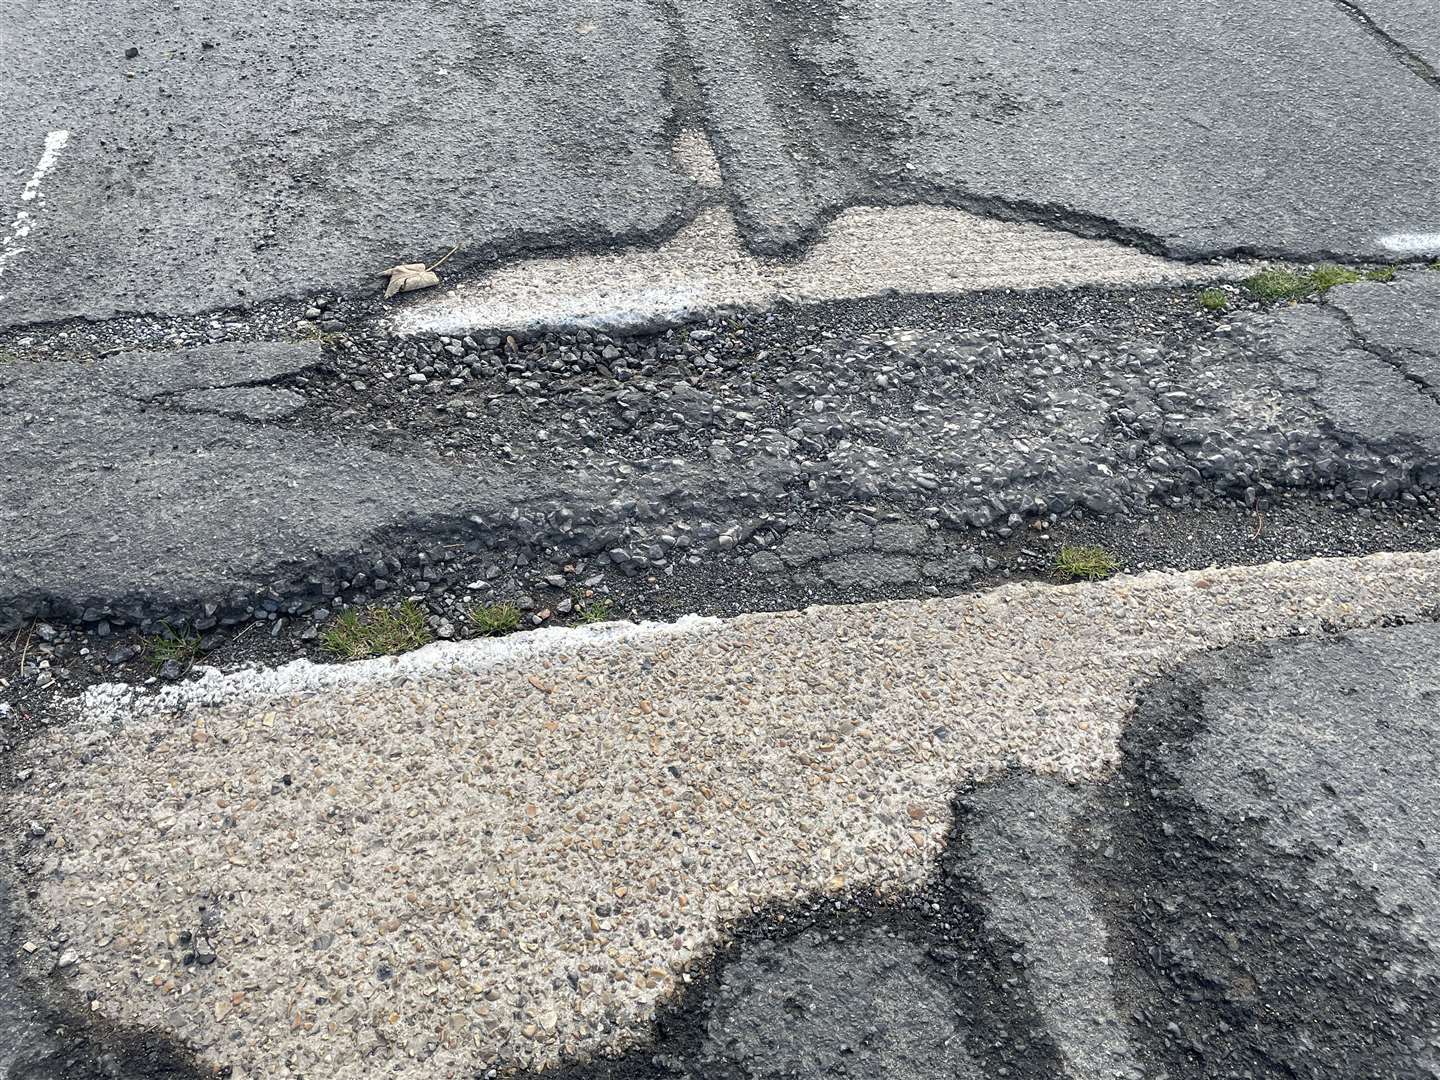 Residents fear the poor road surface could damage cars